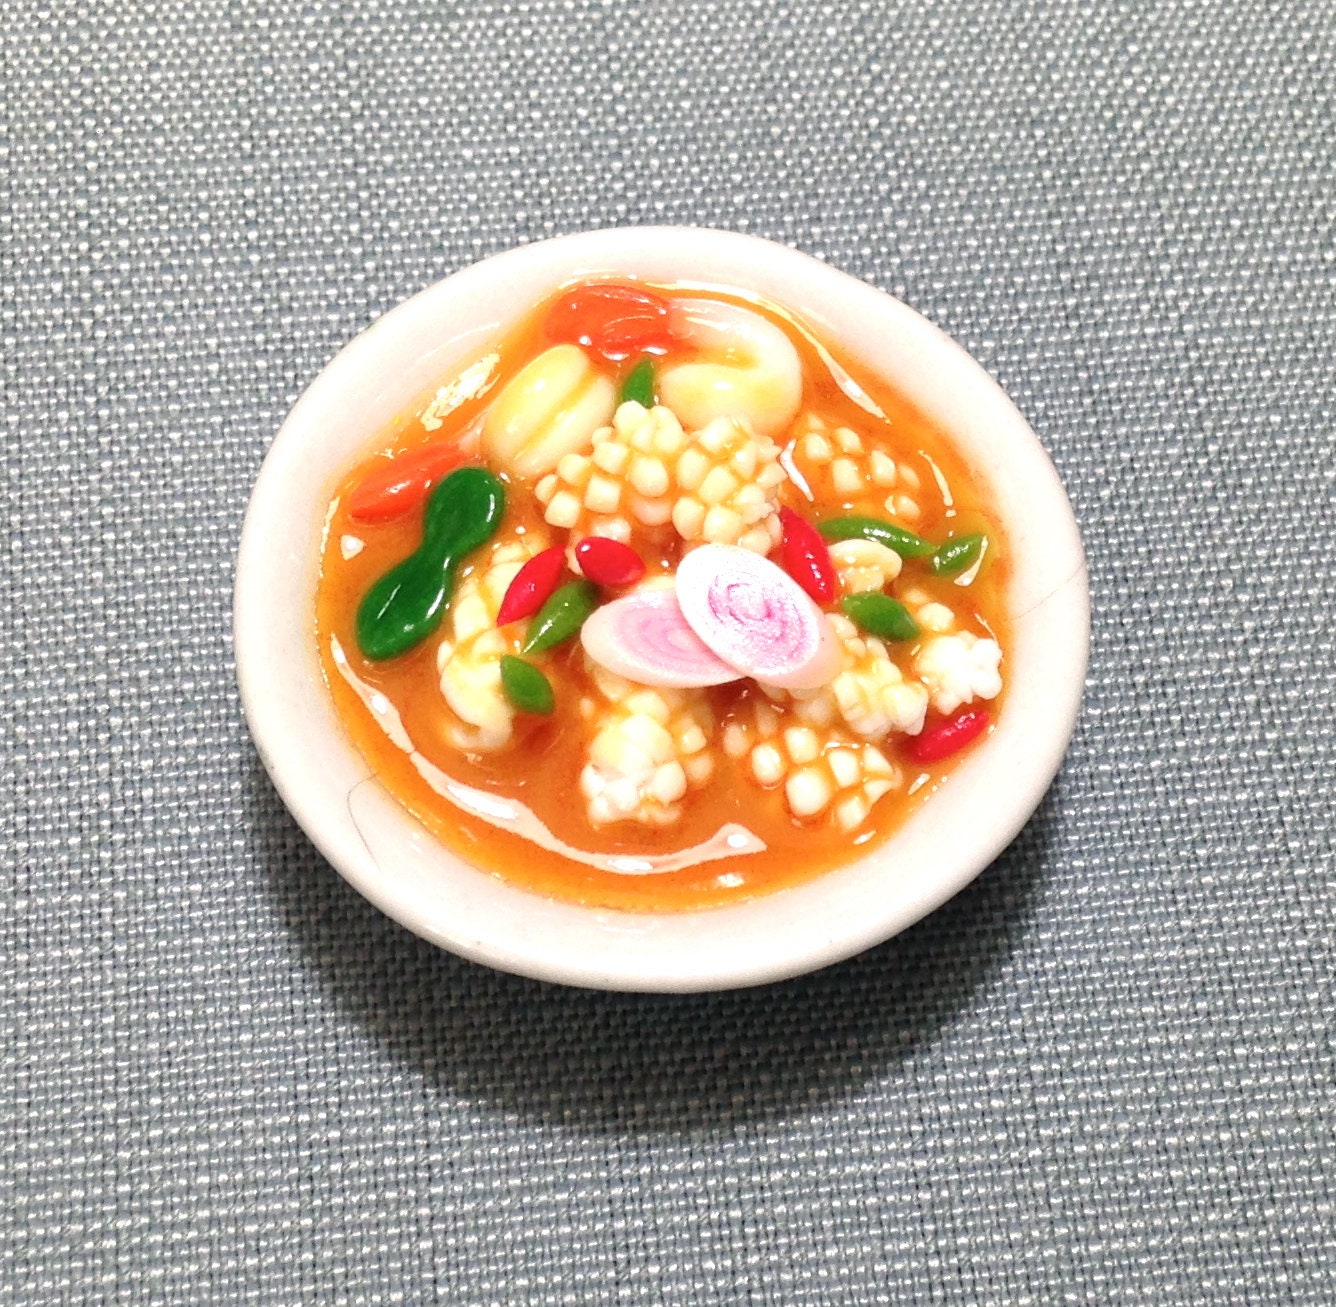 Spicy Seafood Soup Squid Miniature Clay Polymer Asian Food Supply Cute Tiny Small Dish Bowl Ceramic Dollhouse Jewelry Supplies Deco 1/12